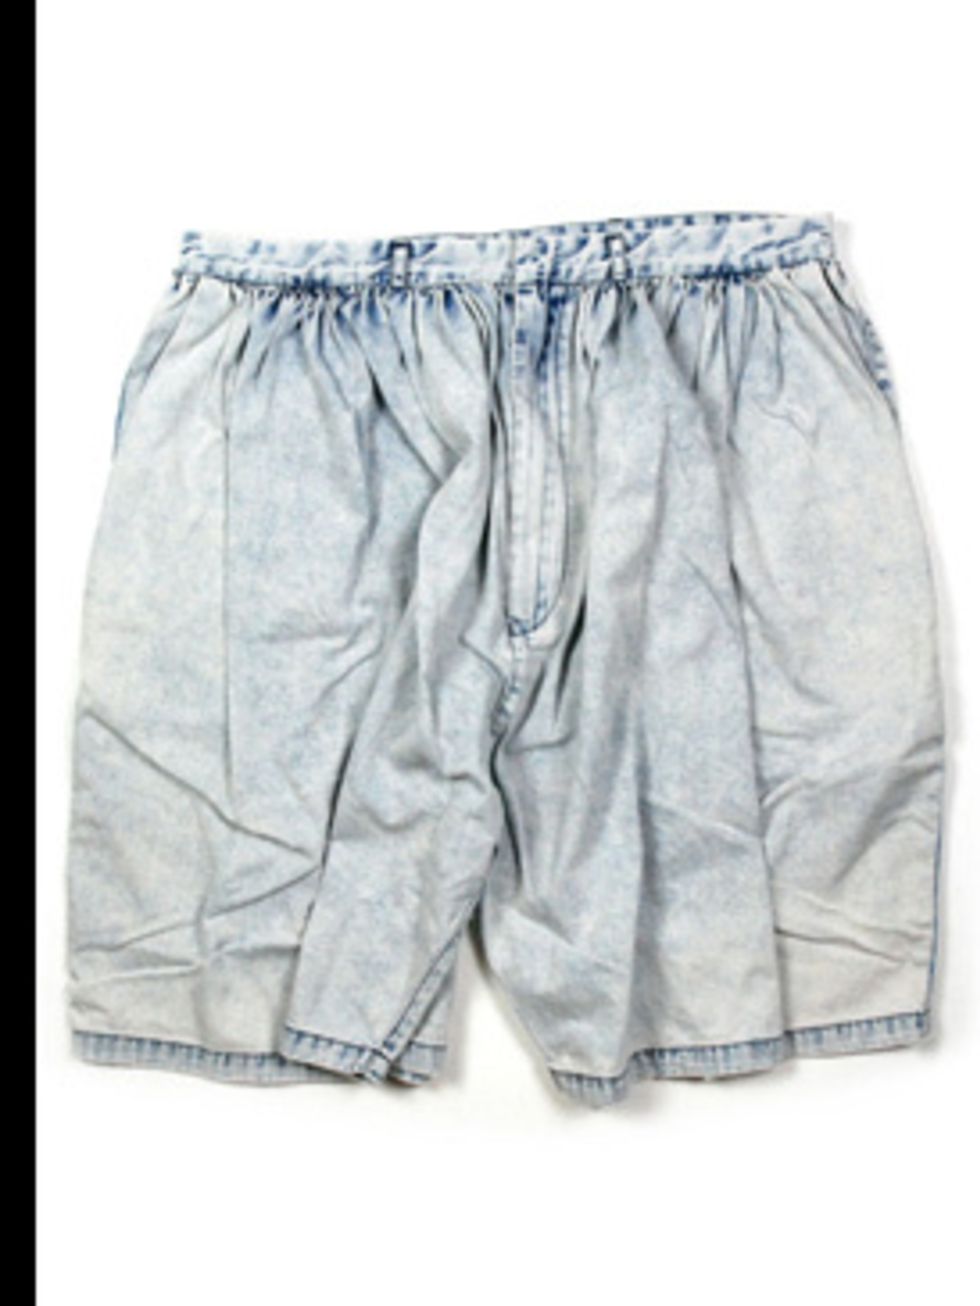 <p>Washed shorts, £129, by Von Sono at <a href="http://www.goodhood.co.uk/?page=1">www.goodhood.com</a></p>